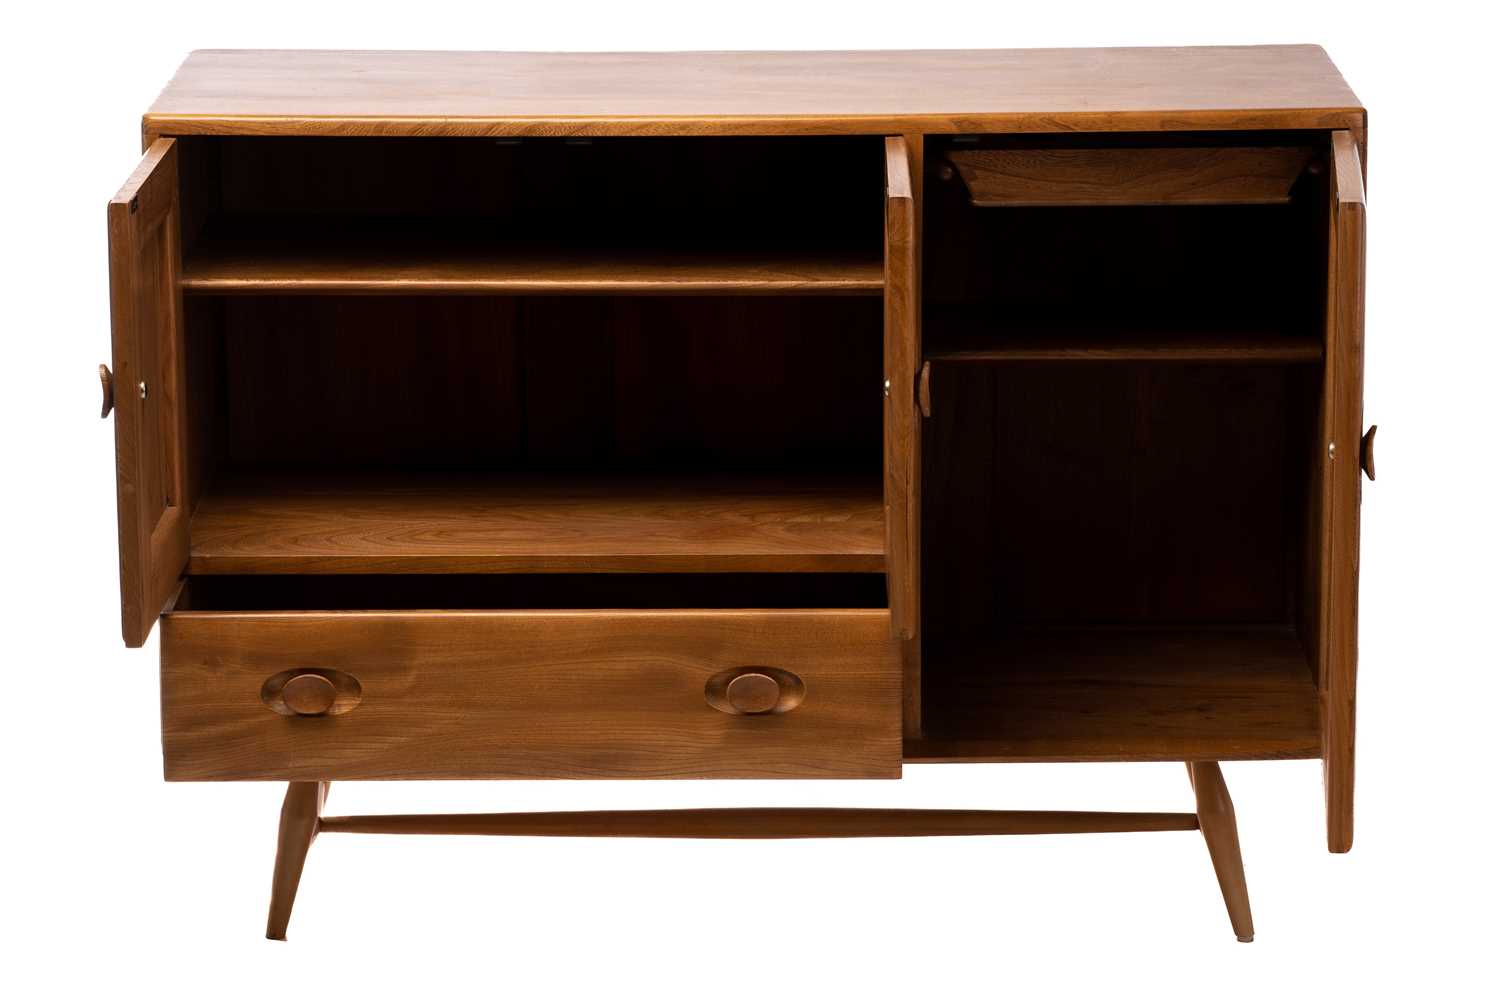 Ercol light ash and beech furniture comprising, a sideboard with a pair of cupboard doors over a - Image 3 of 39